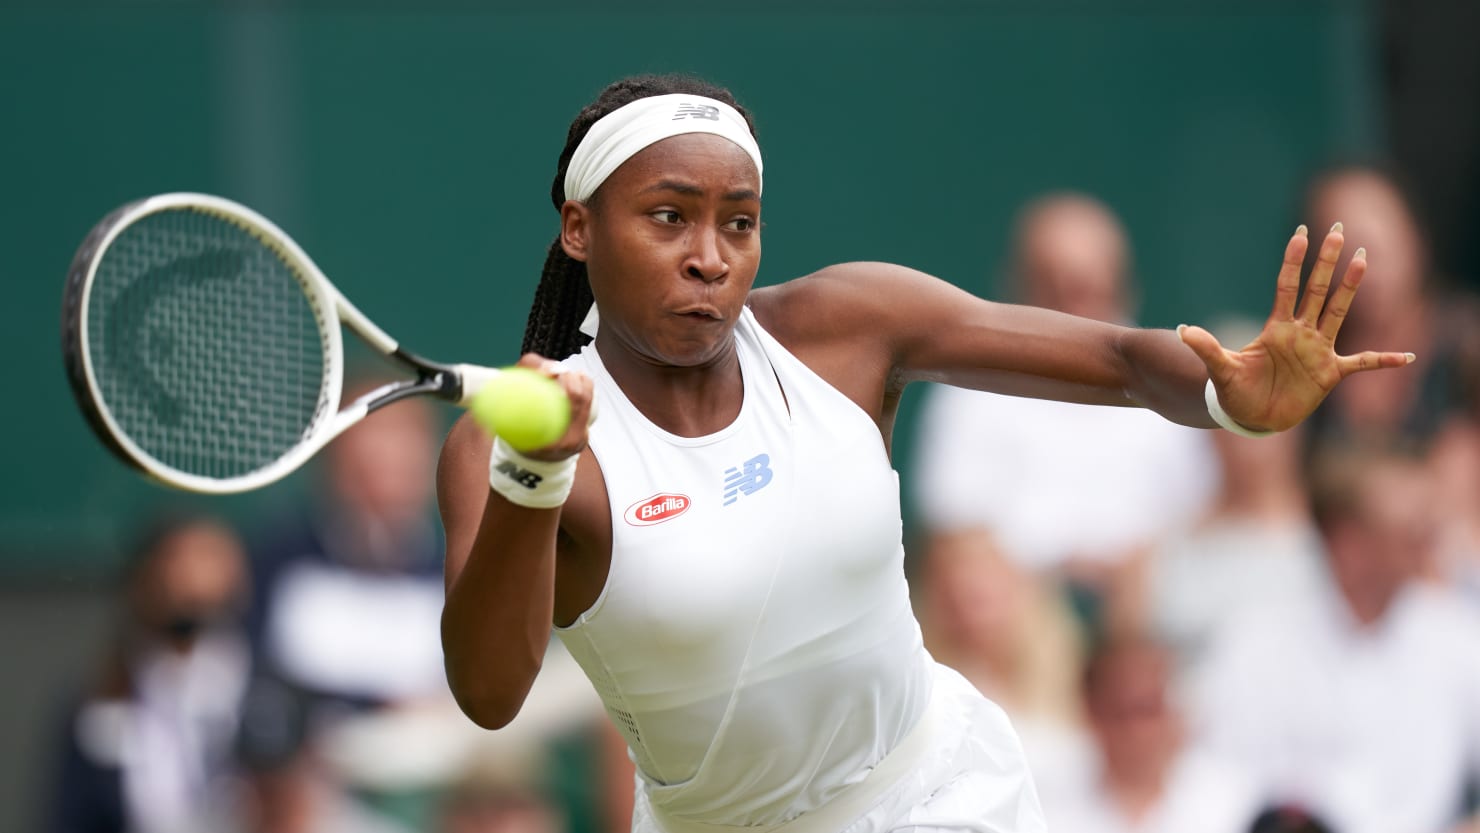 Coco Gauff, 17, Becomes Youngest U.S